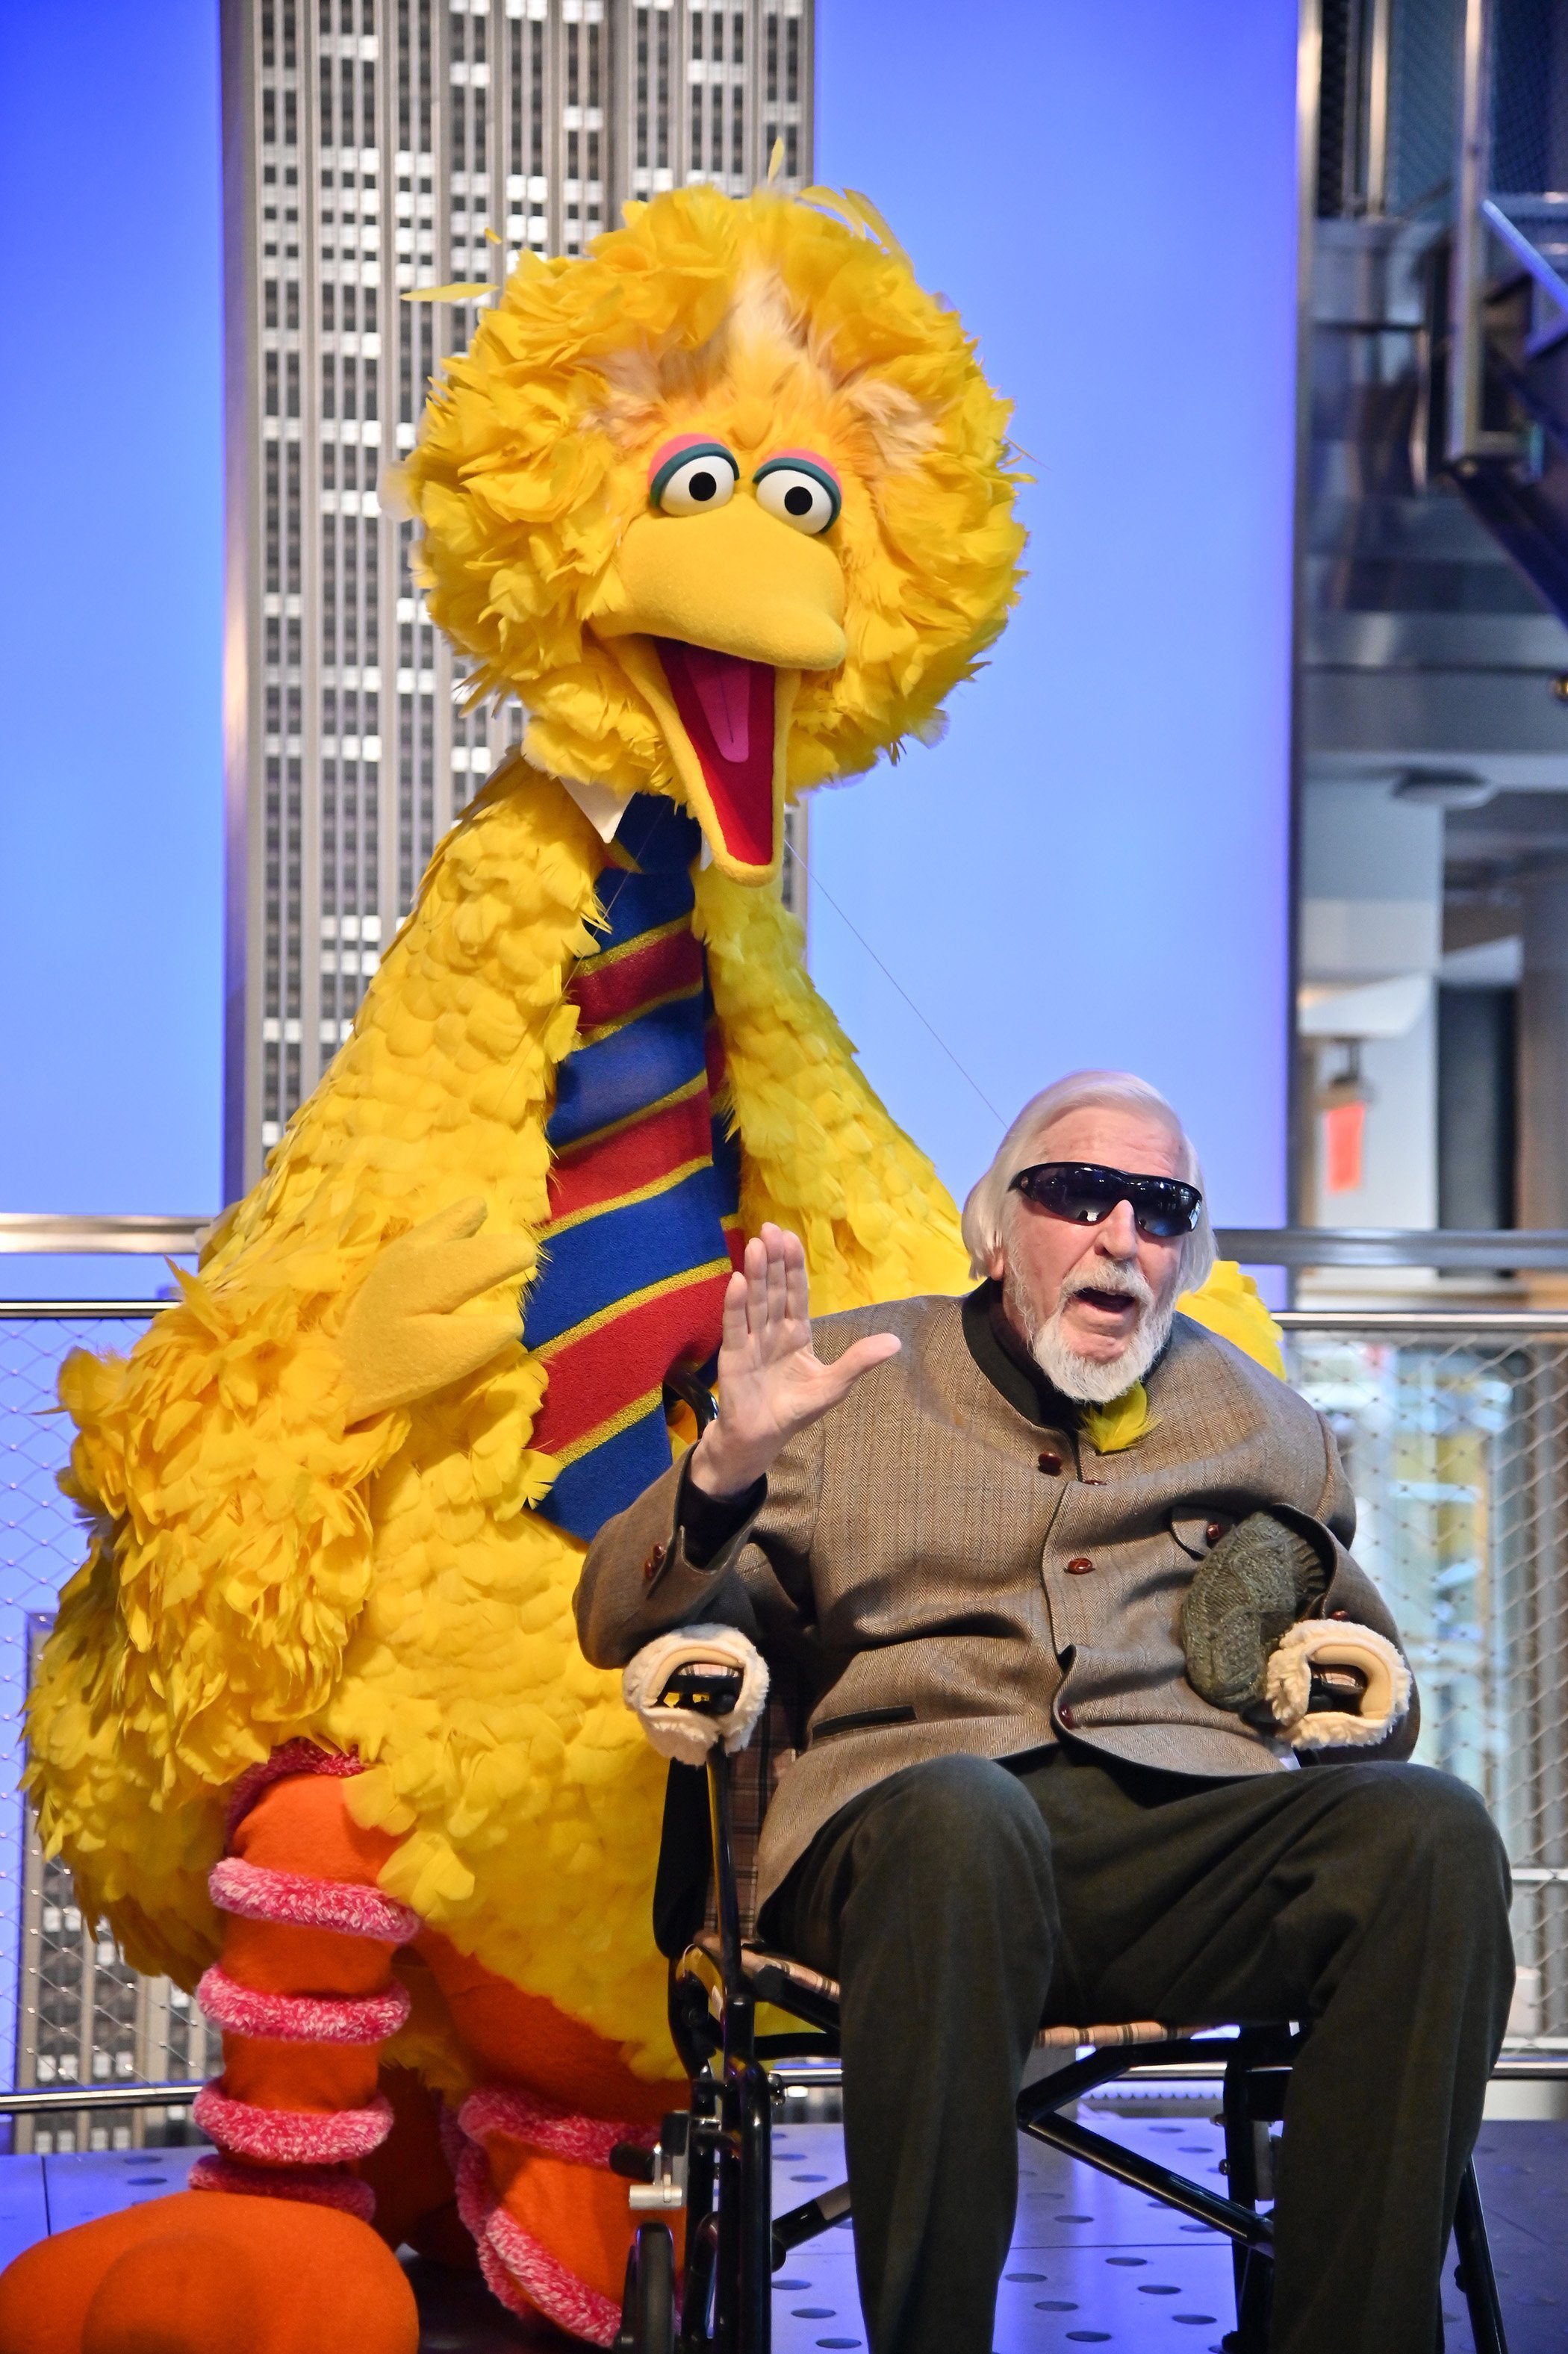  Caroll Spinney Light The Empire State Building at The Empire State Building on November 08, 2019, in New York City. | Source: Getty Images.